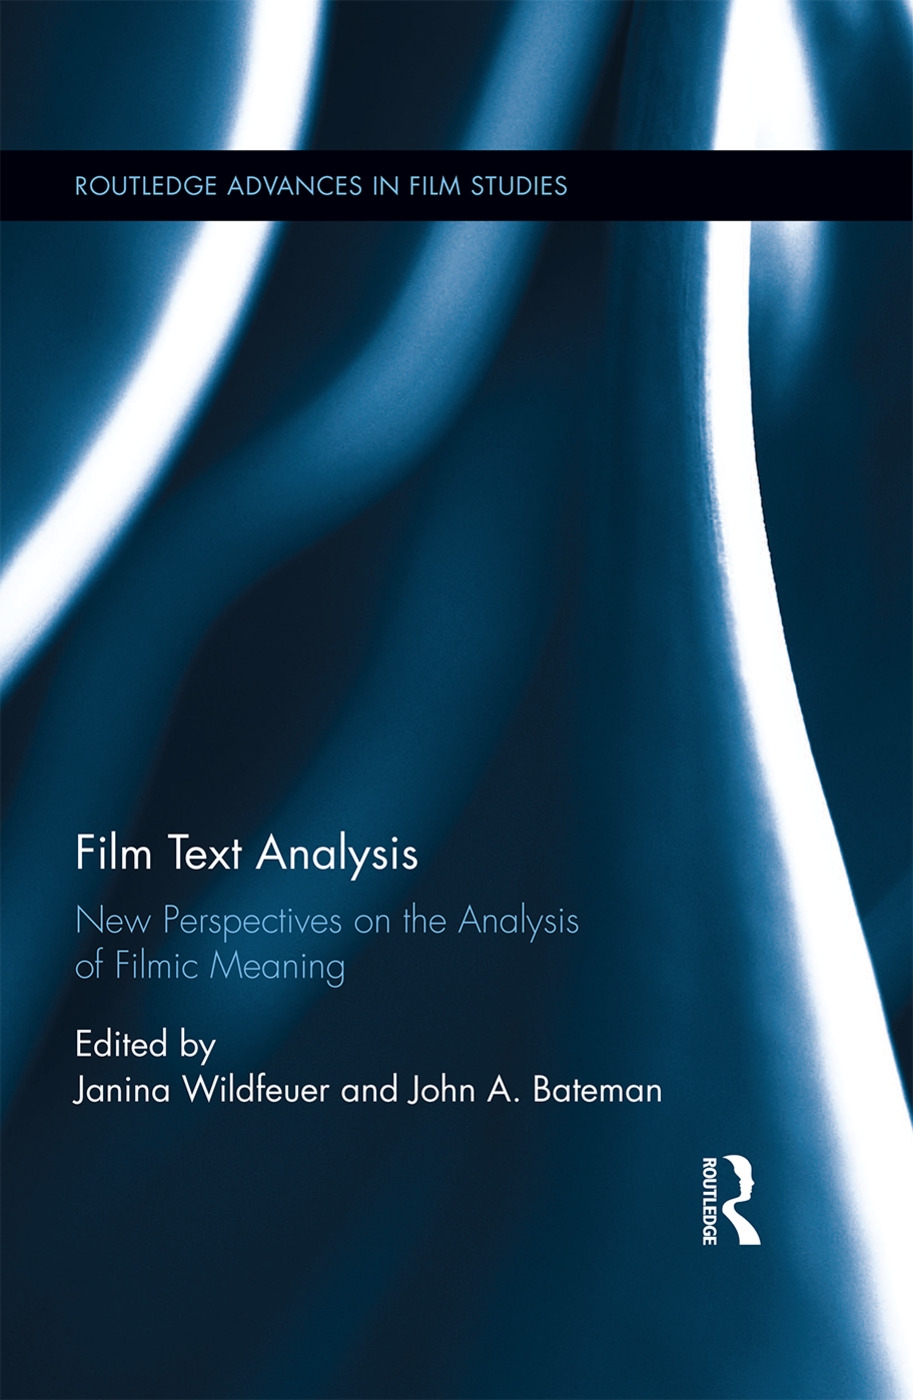 Film Text Analysis: New Perspectives on the Analysis of Filmic Meaning